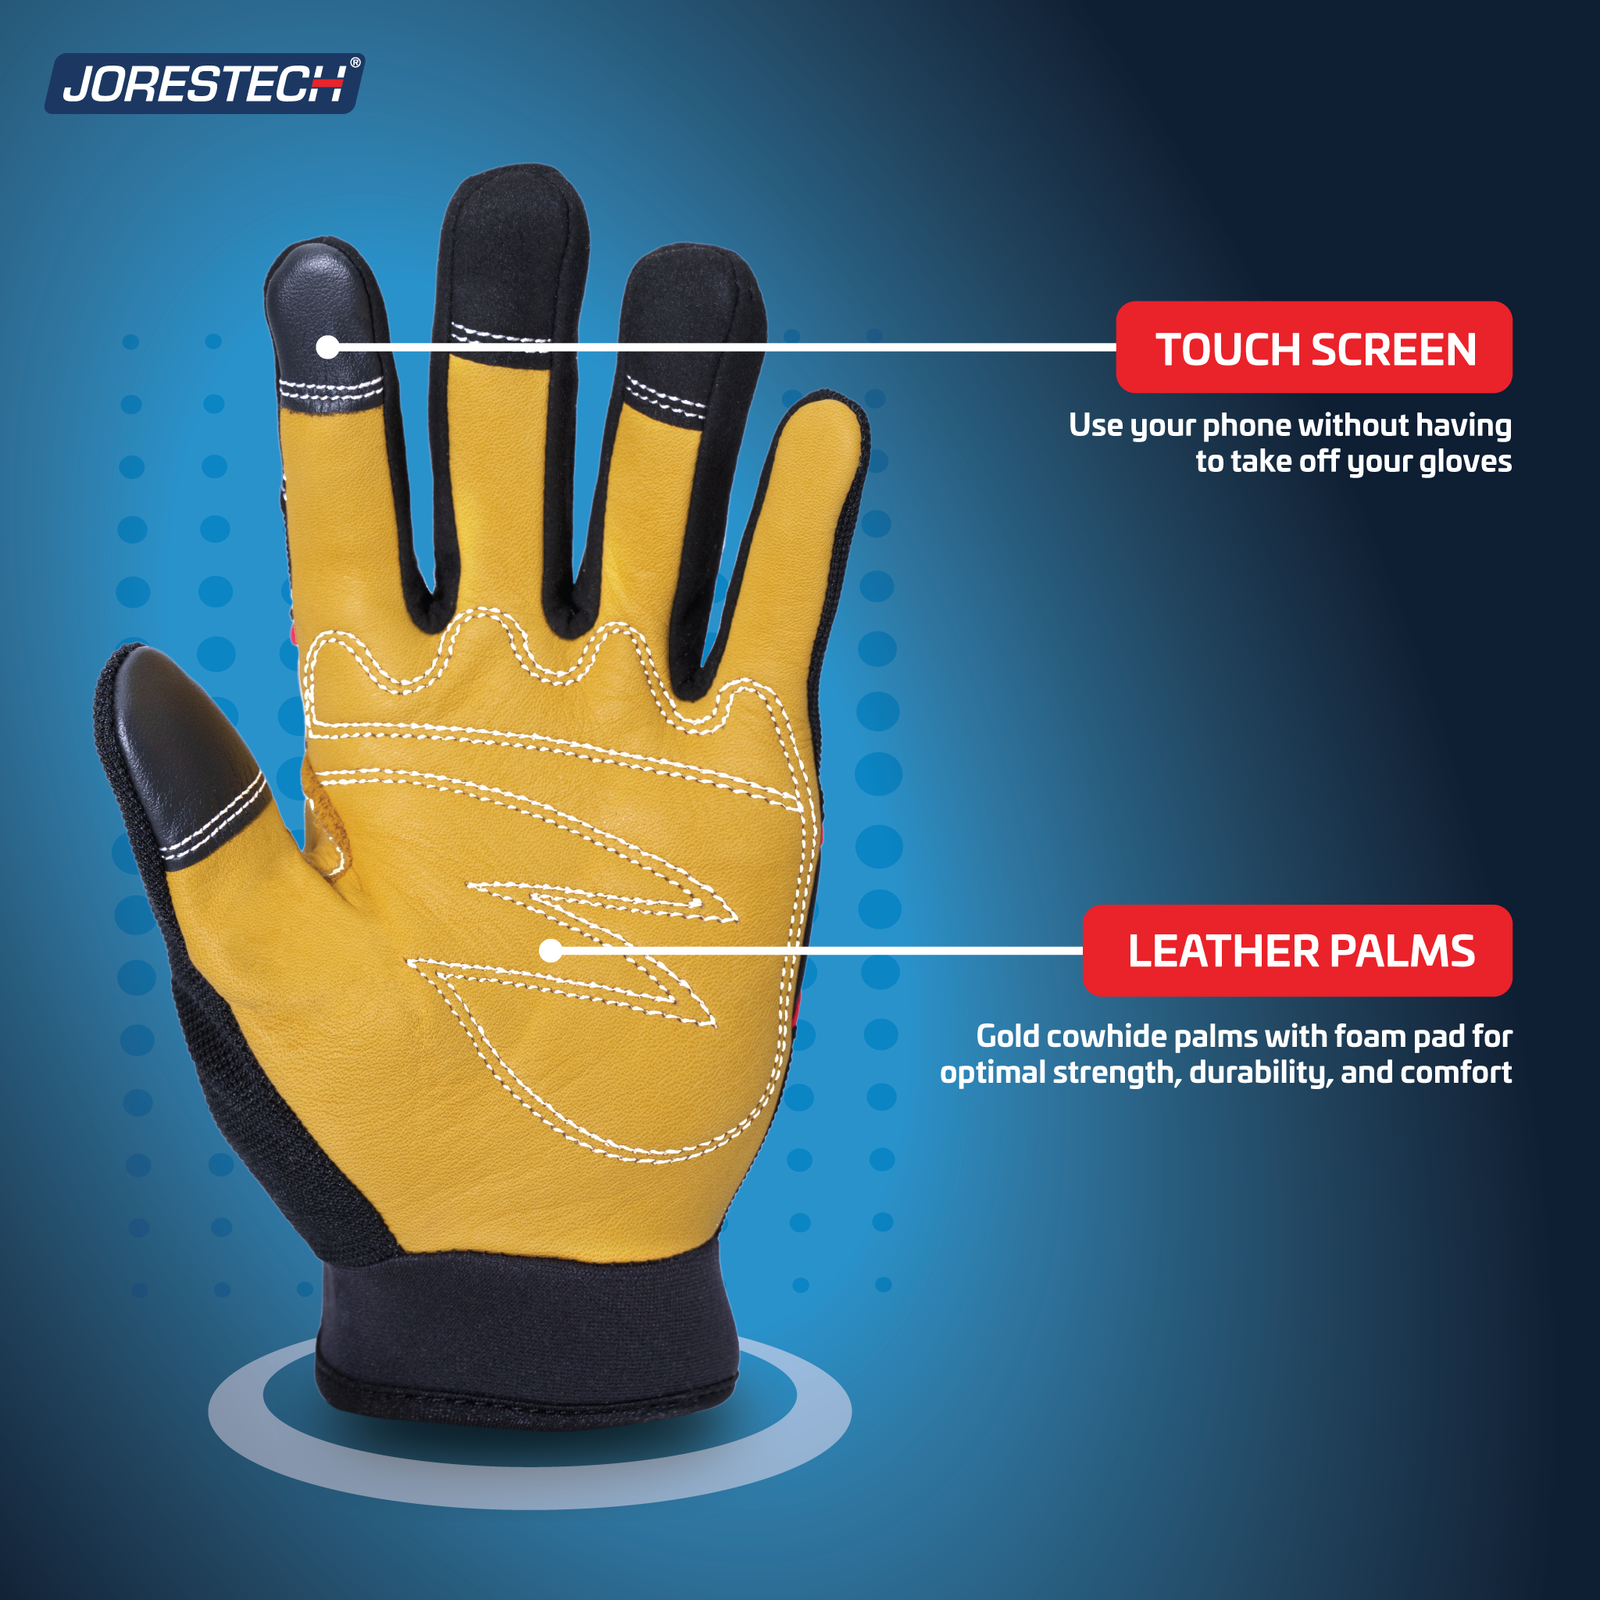 10 Pack - Work Gloves with Touchscreen by Grip Support